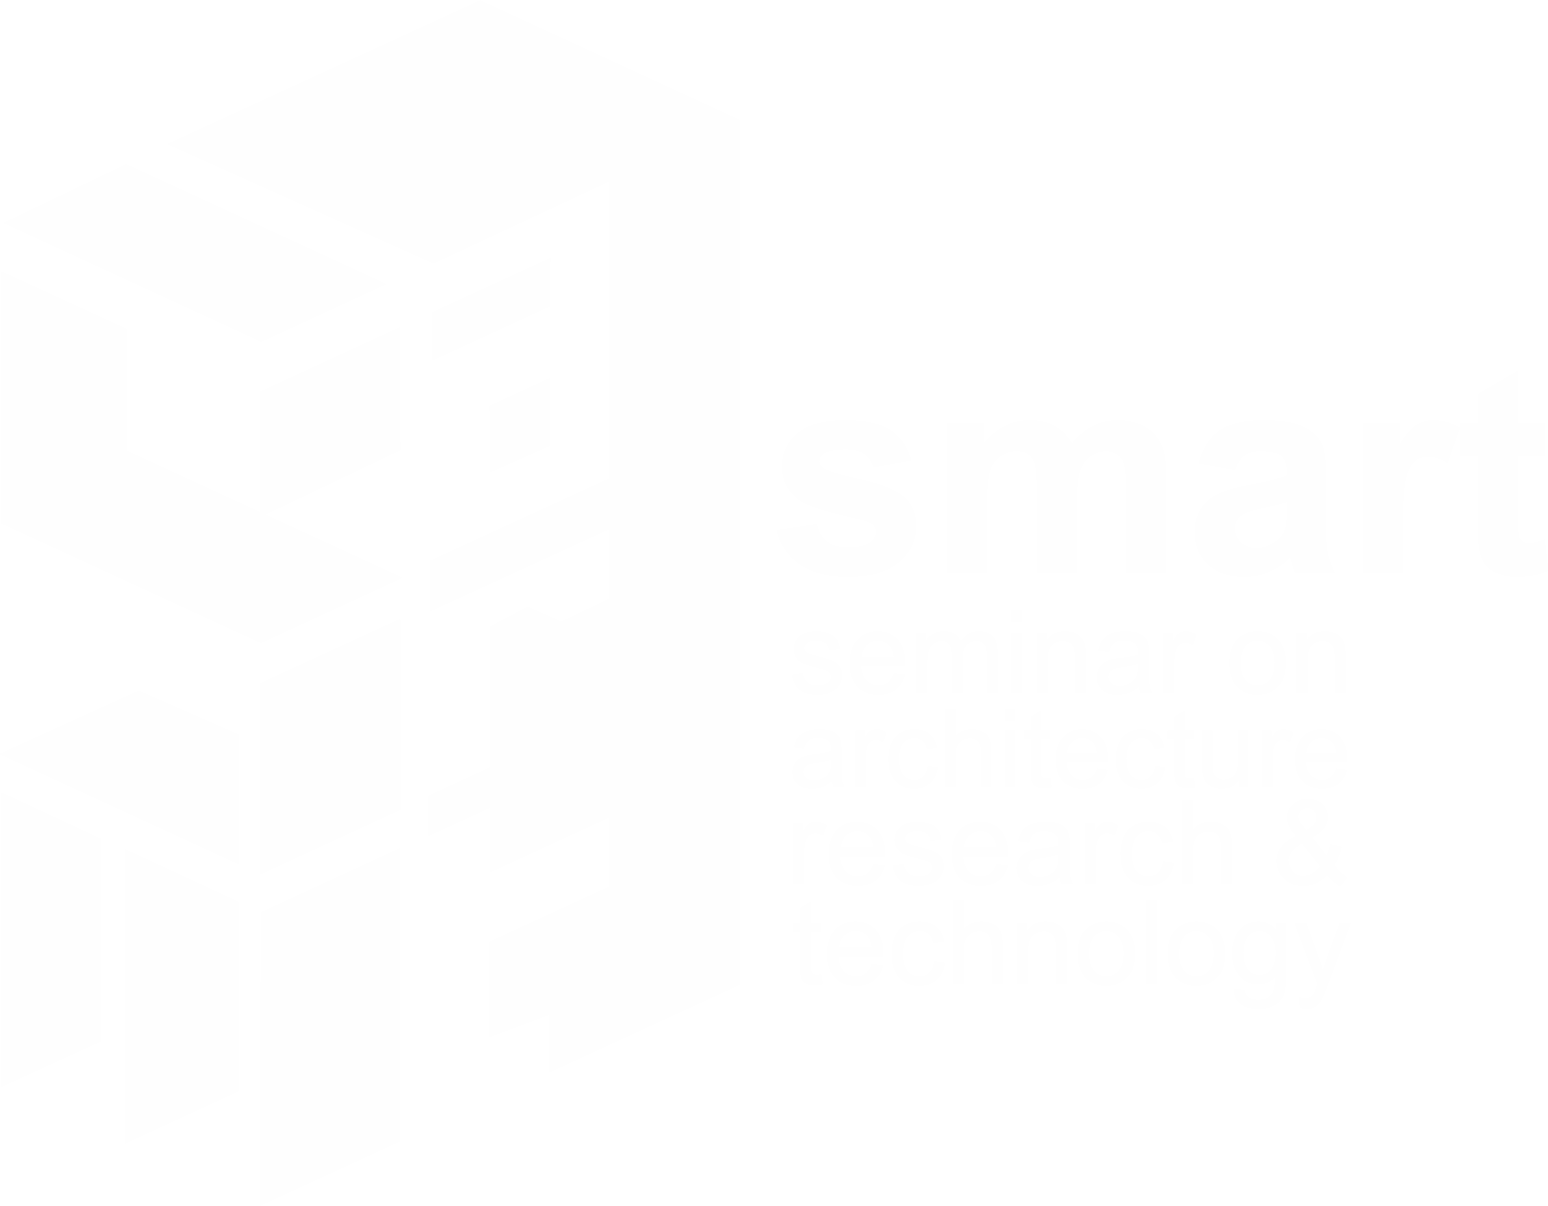 SMART - Seminar on Architecture Research & Technology